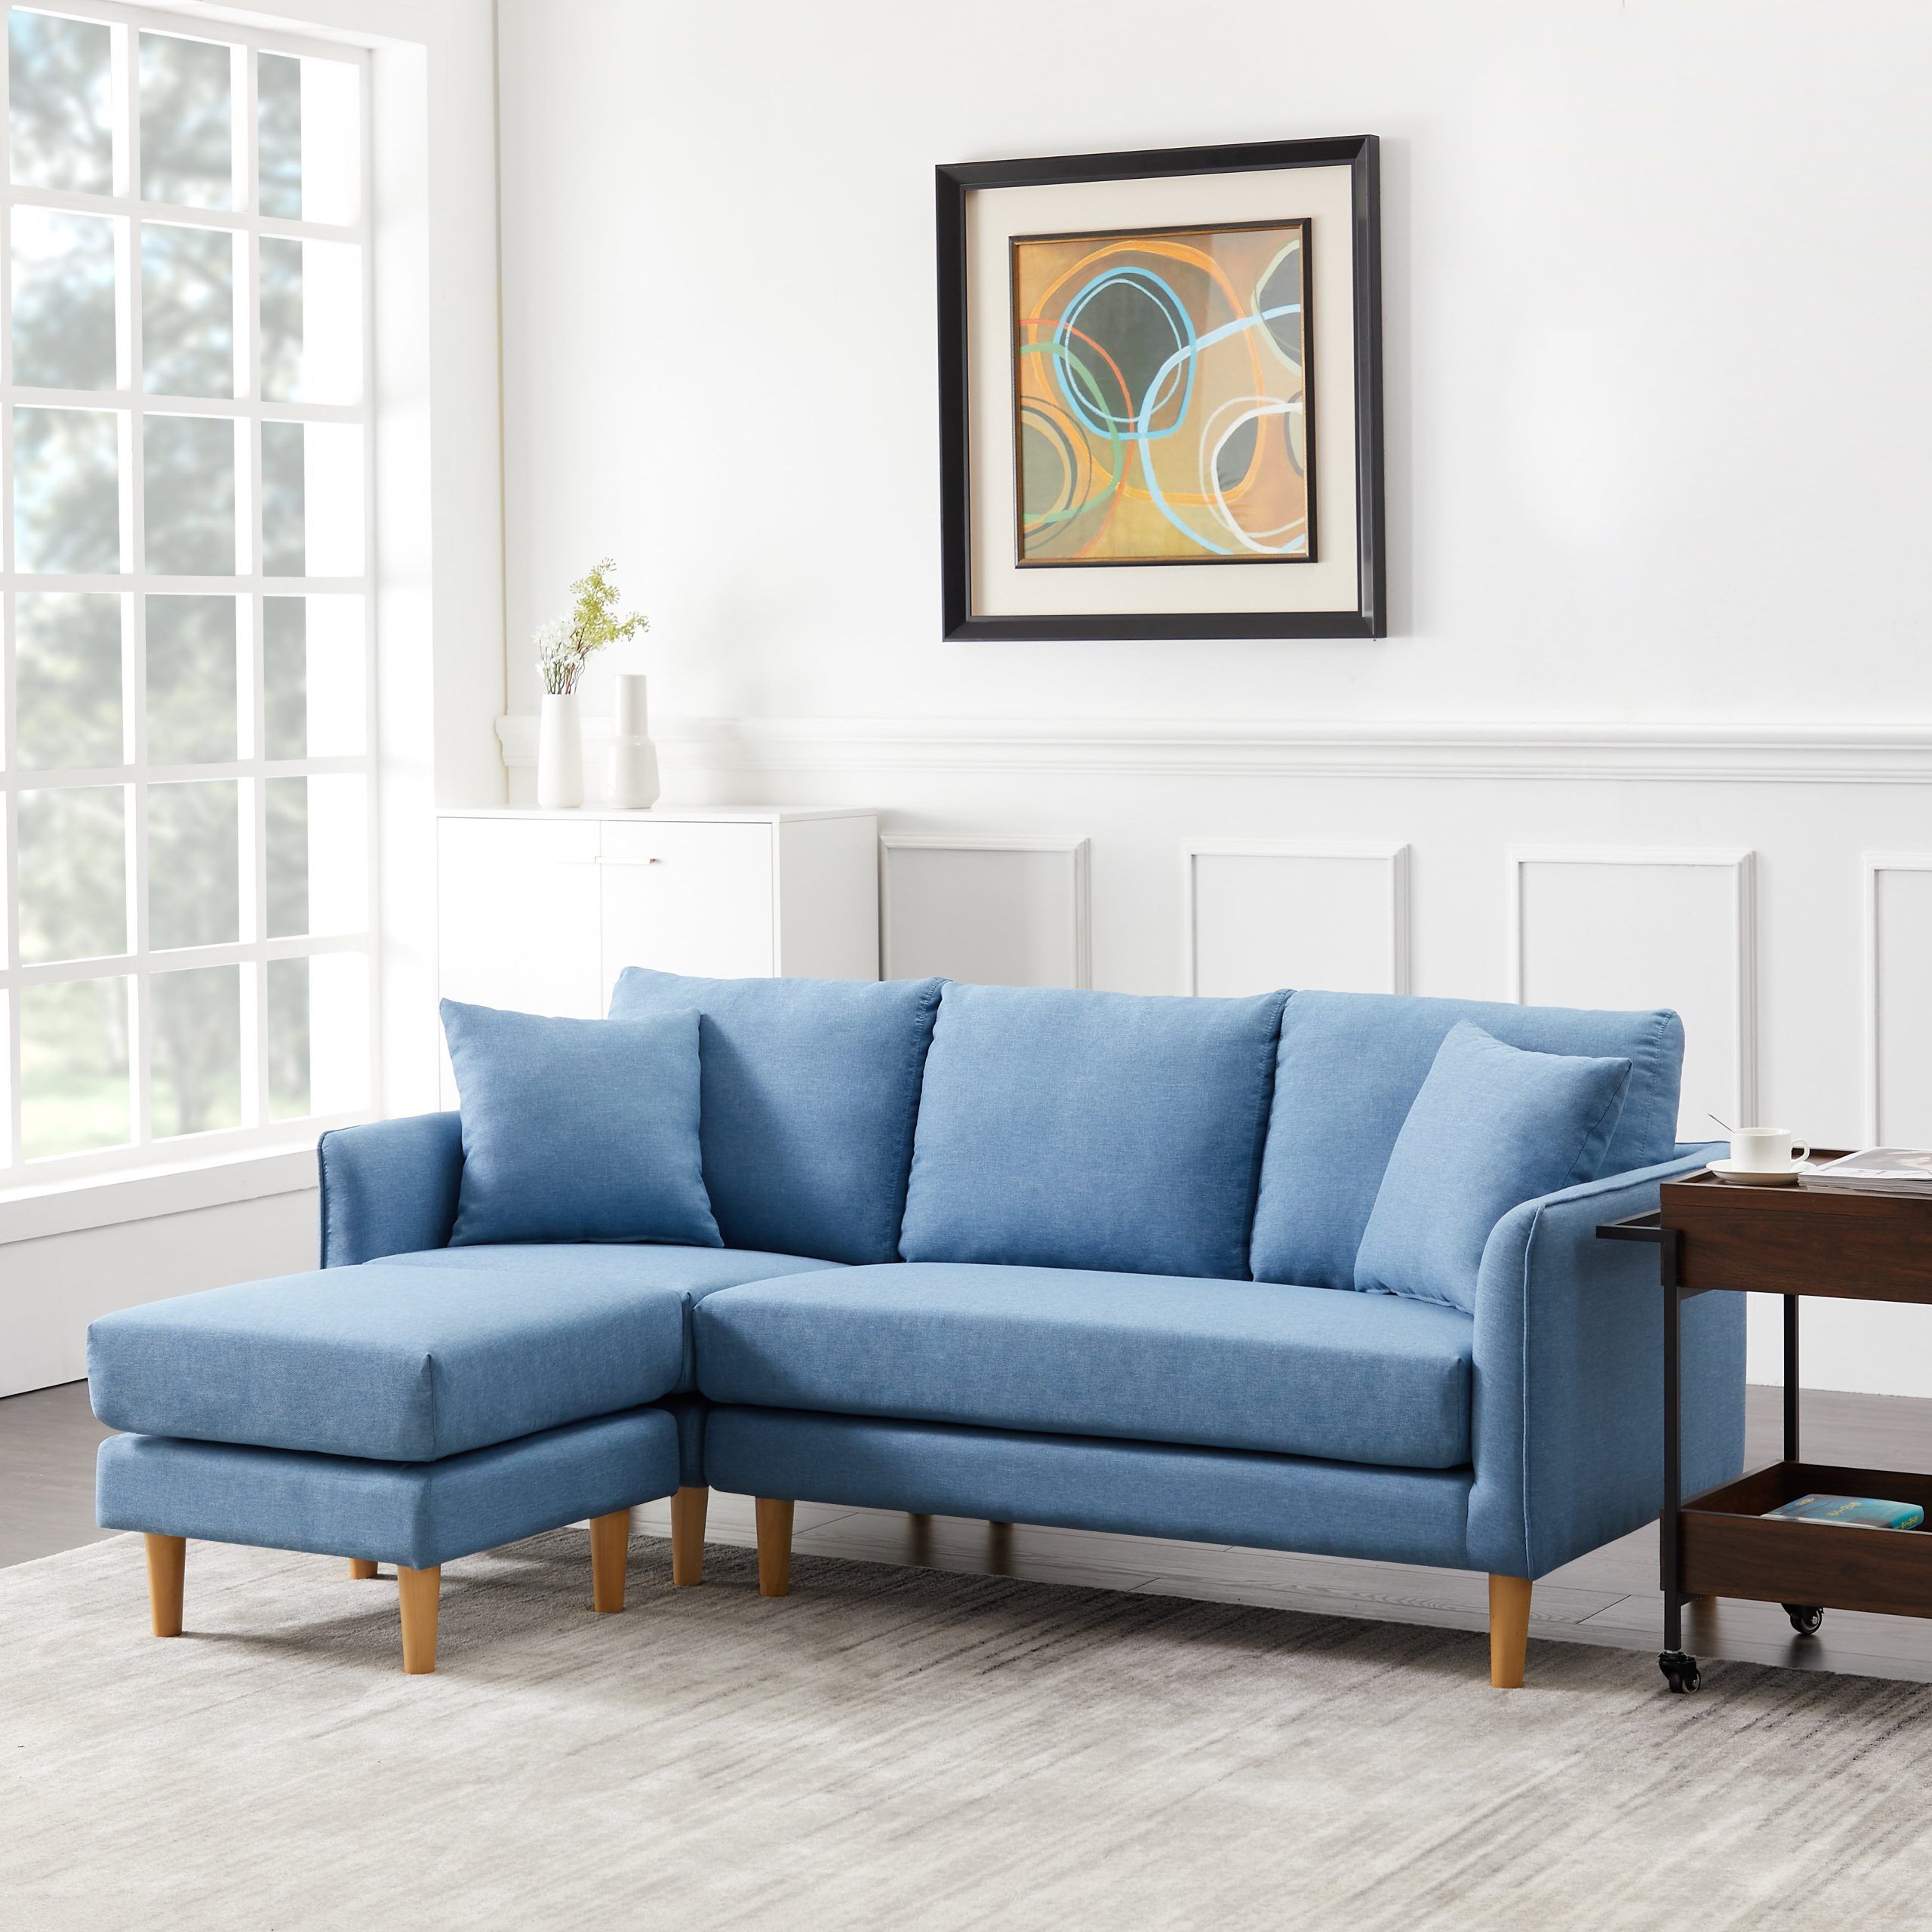 Uhomepro Convertible Sectional Sofa Couch, 74"w L Shaped Couch With Within Sofas For Small Spaces (View 15 of 20)